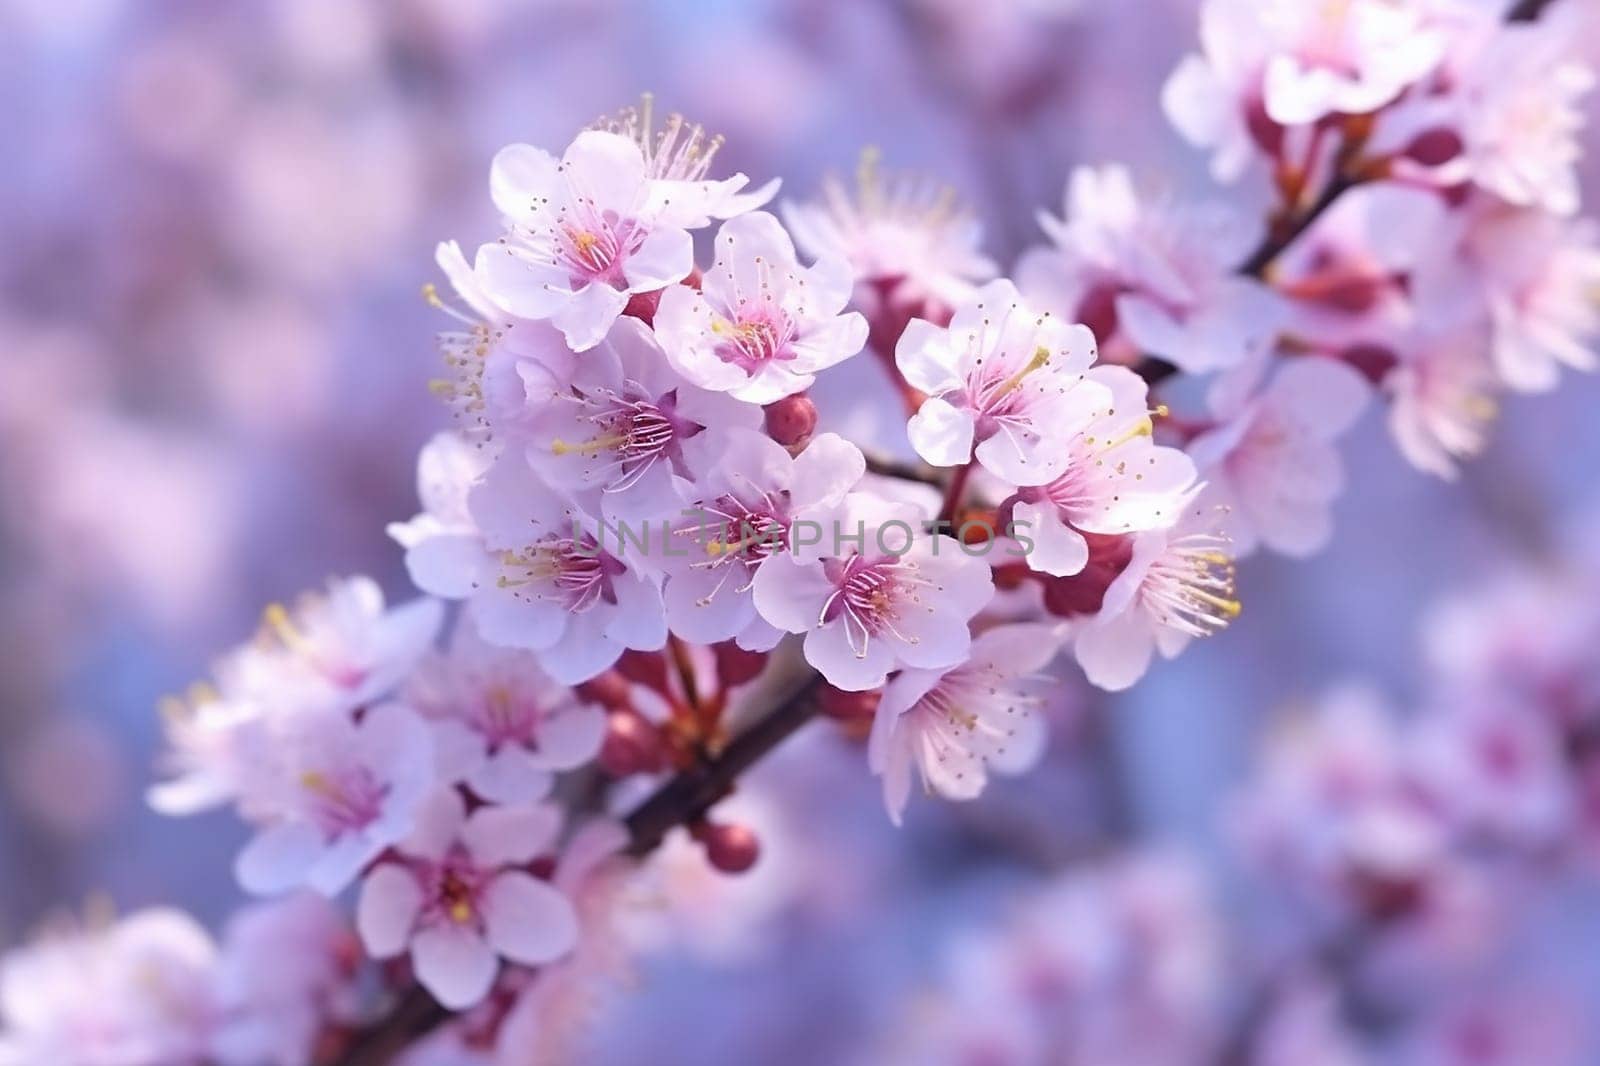 Close up of pink cherry blossoms in bloom against a soft focus background. by Hype2art